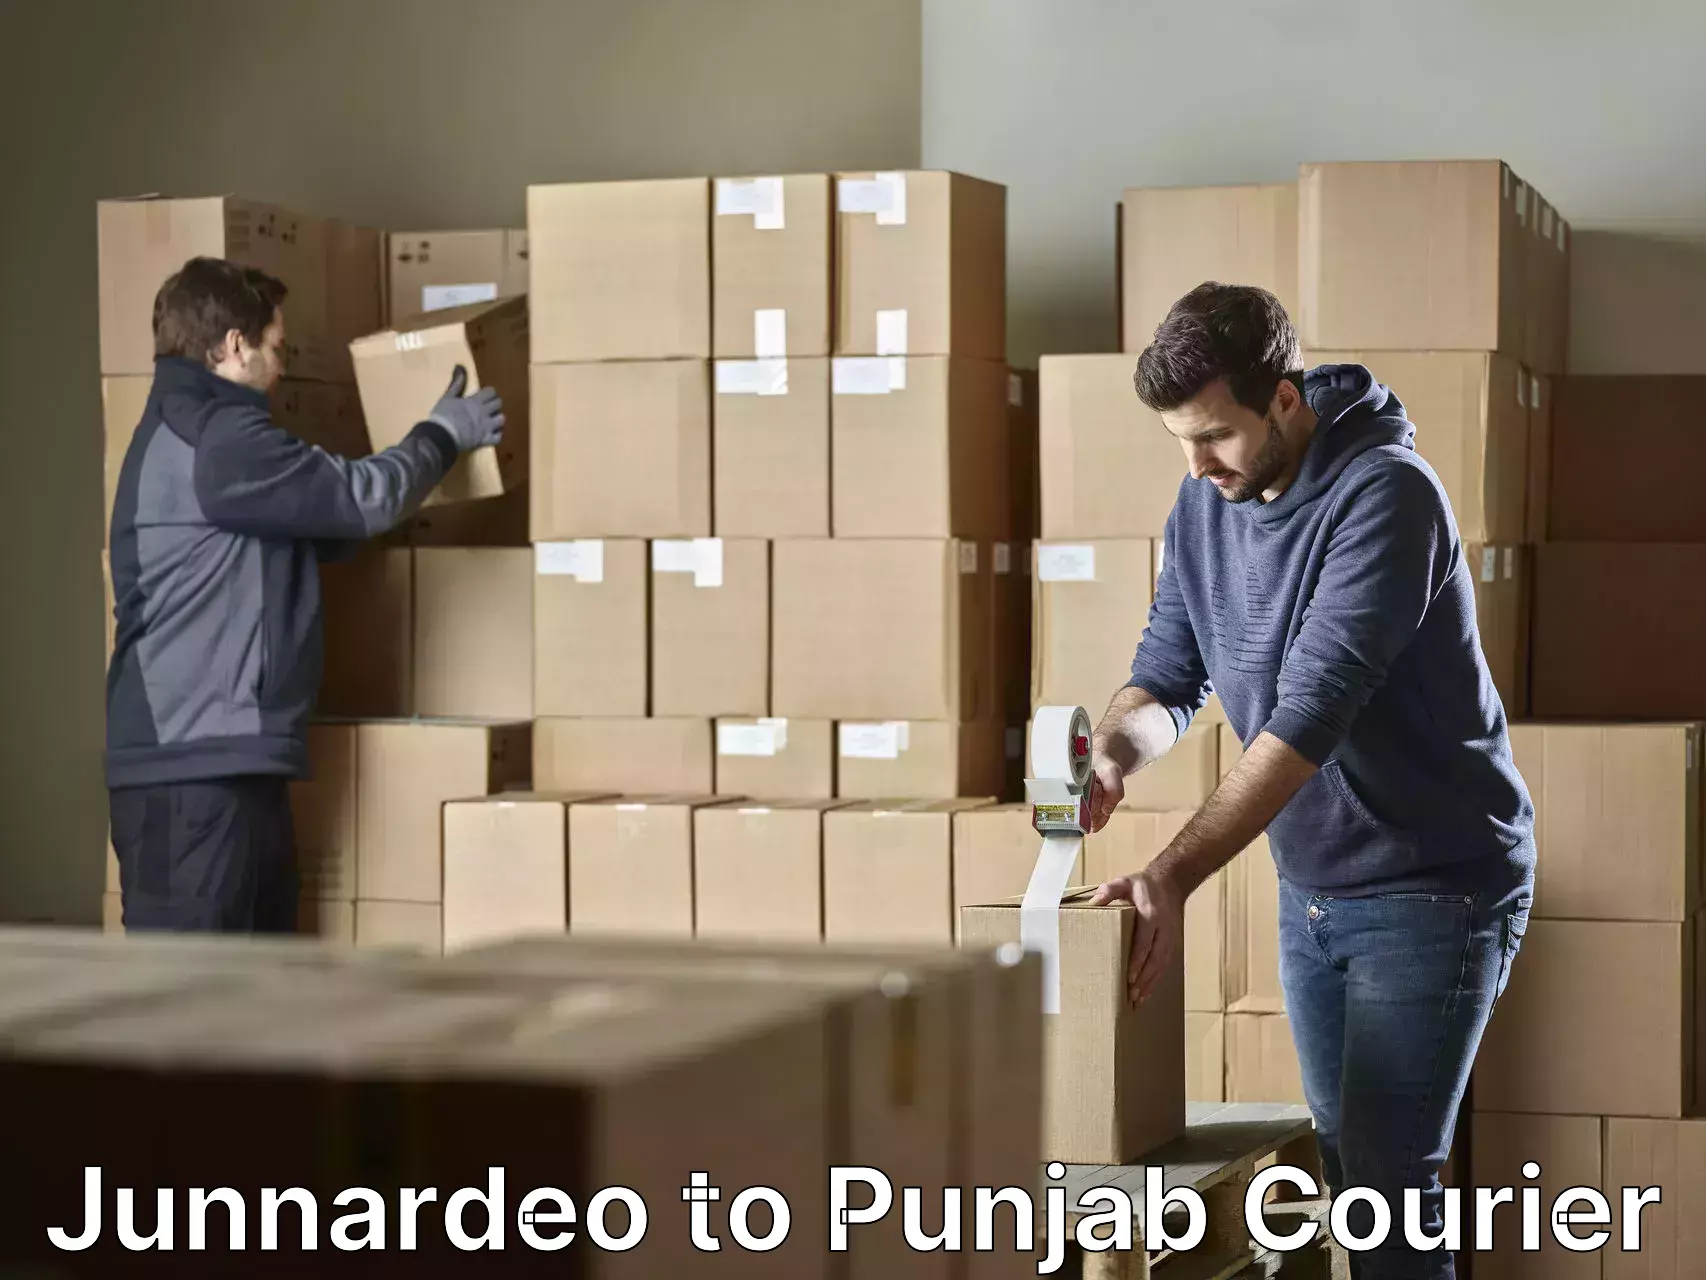 Furniture relocation services Junnardeo to Punjab